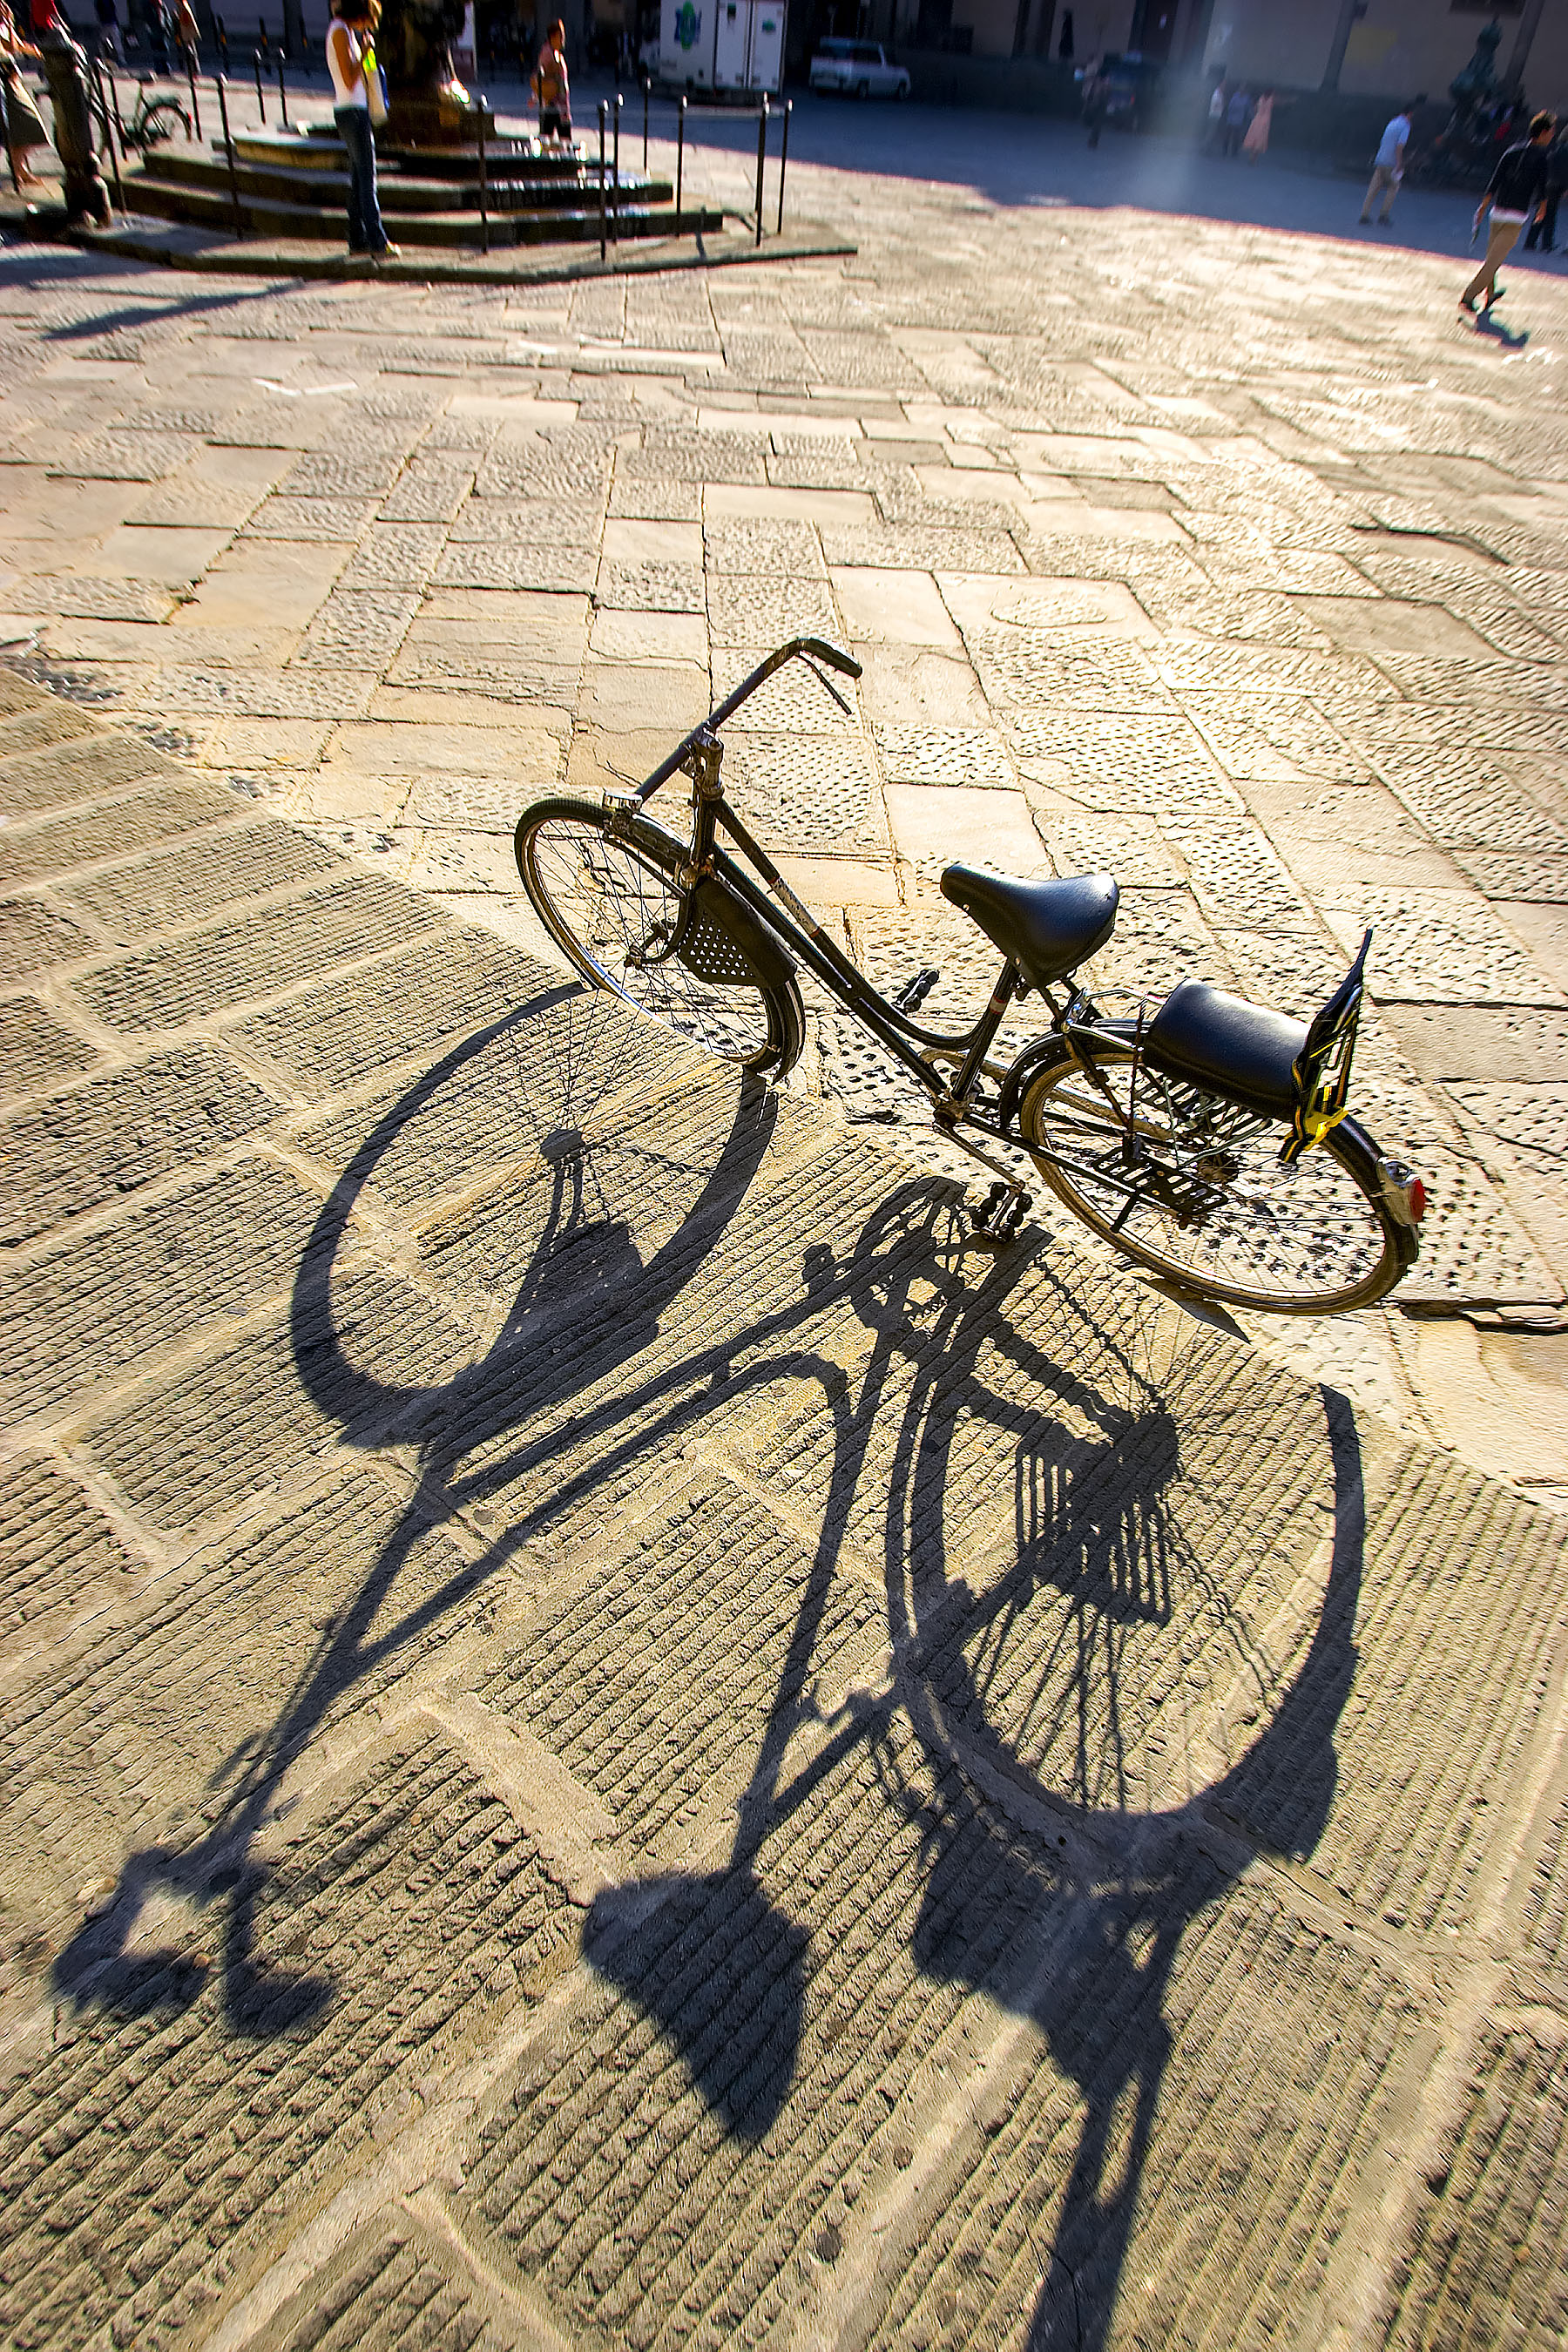 Bicycle in Plaza, piazza in Florence Italy with long shadow on cobblestone